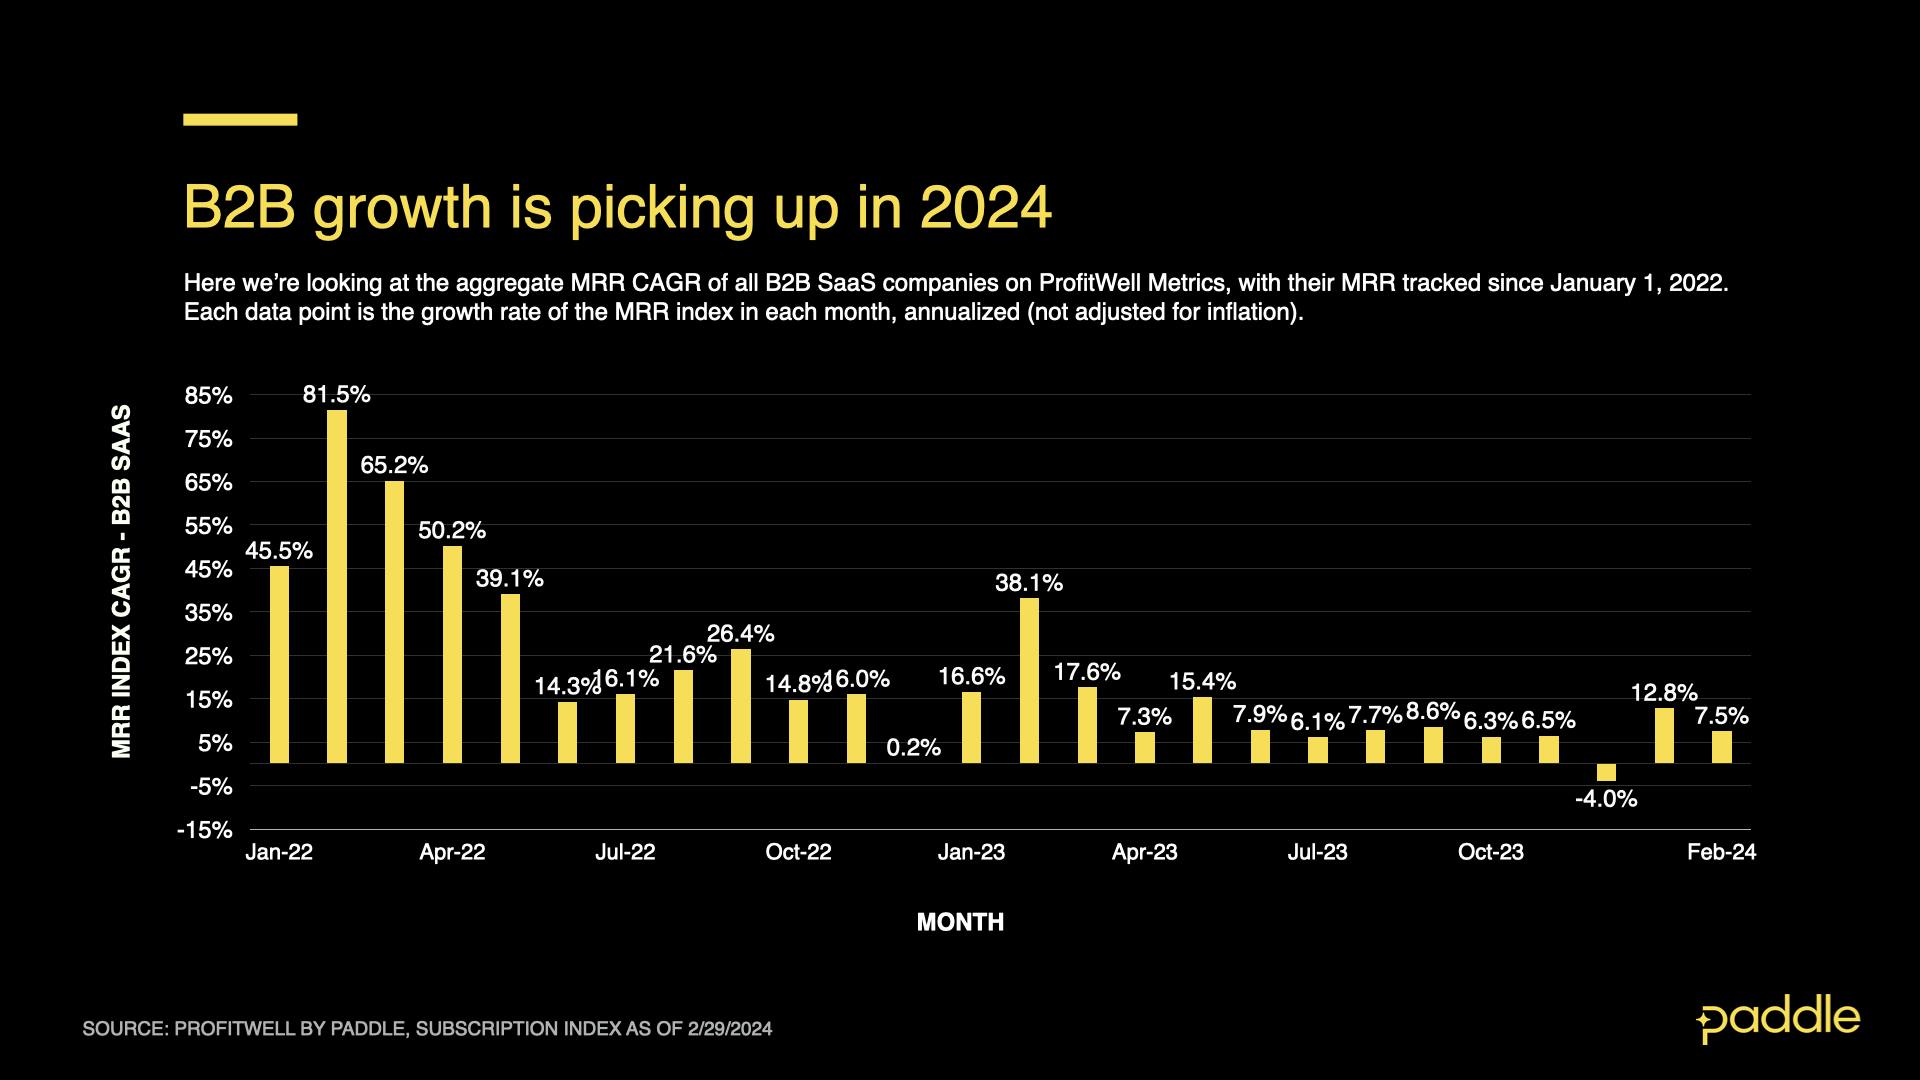 B2B growth is picking up in 2024